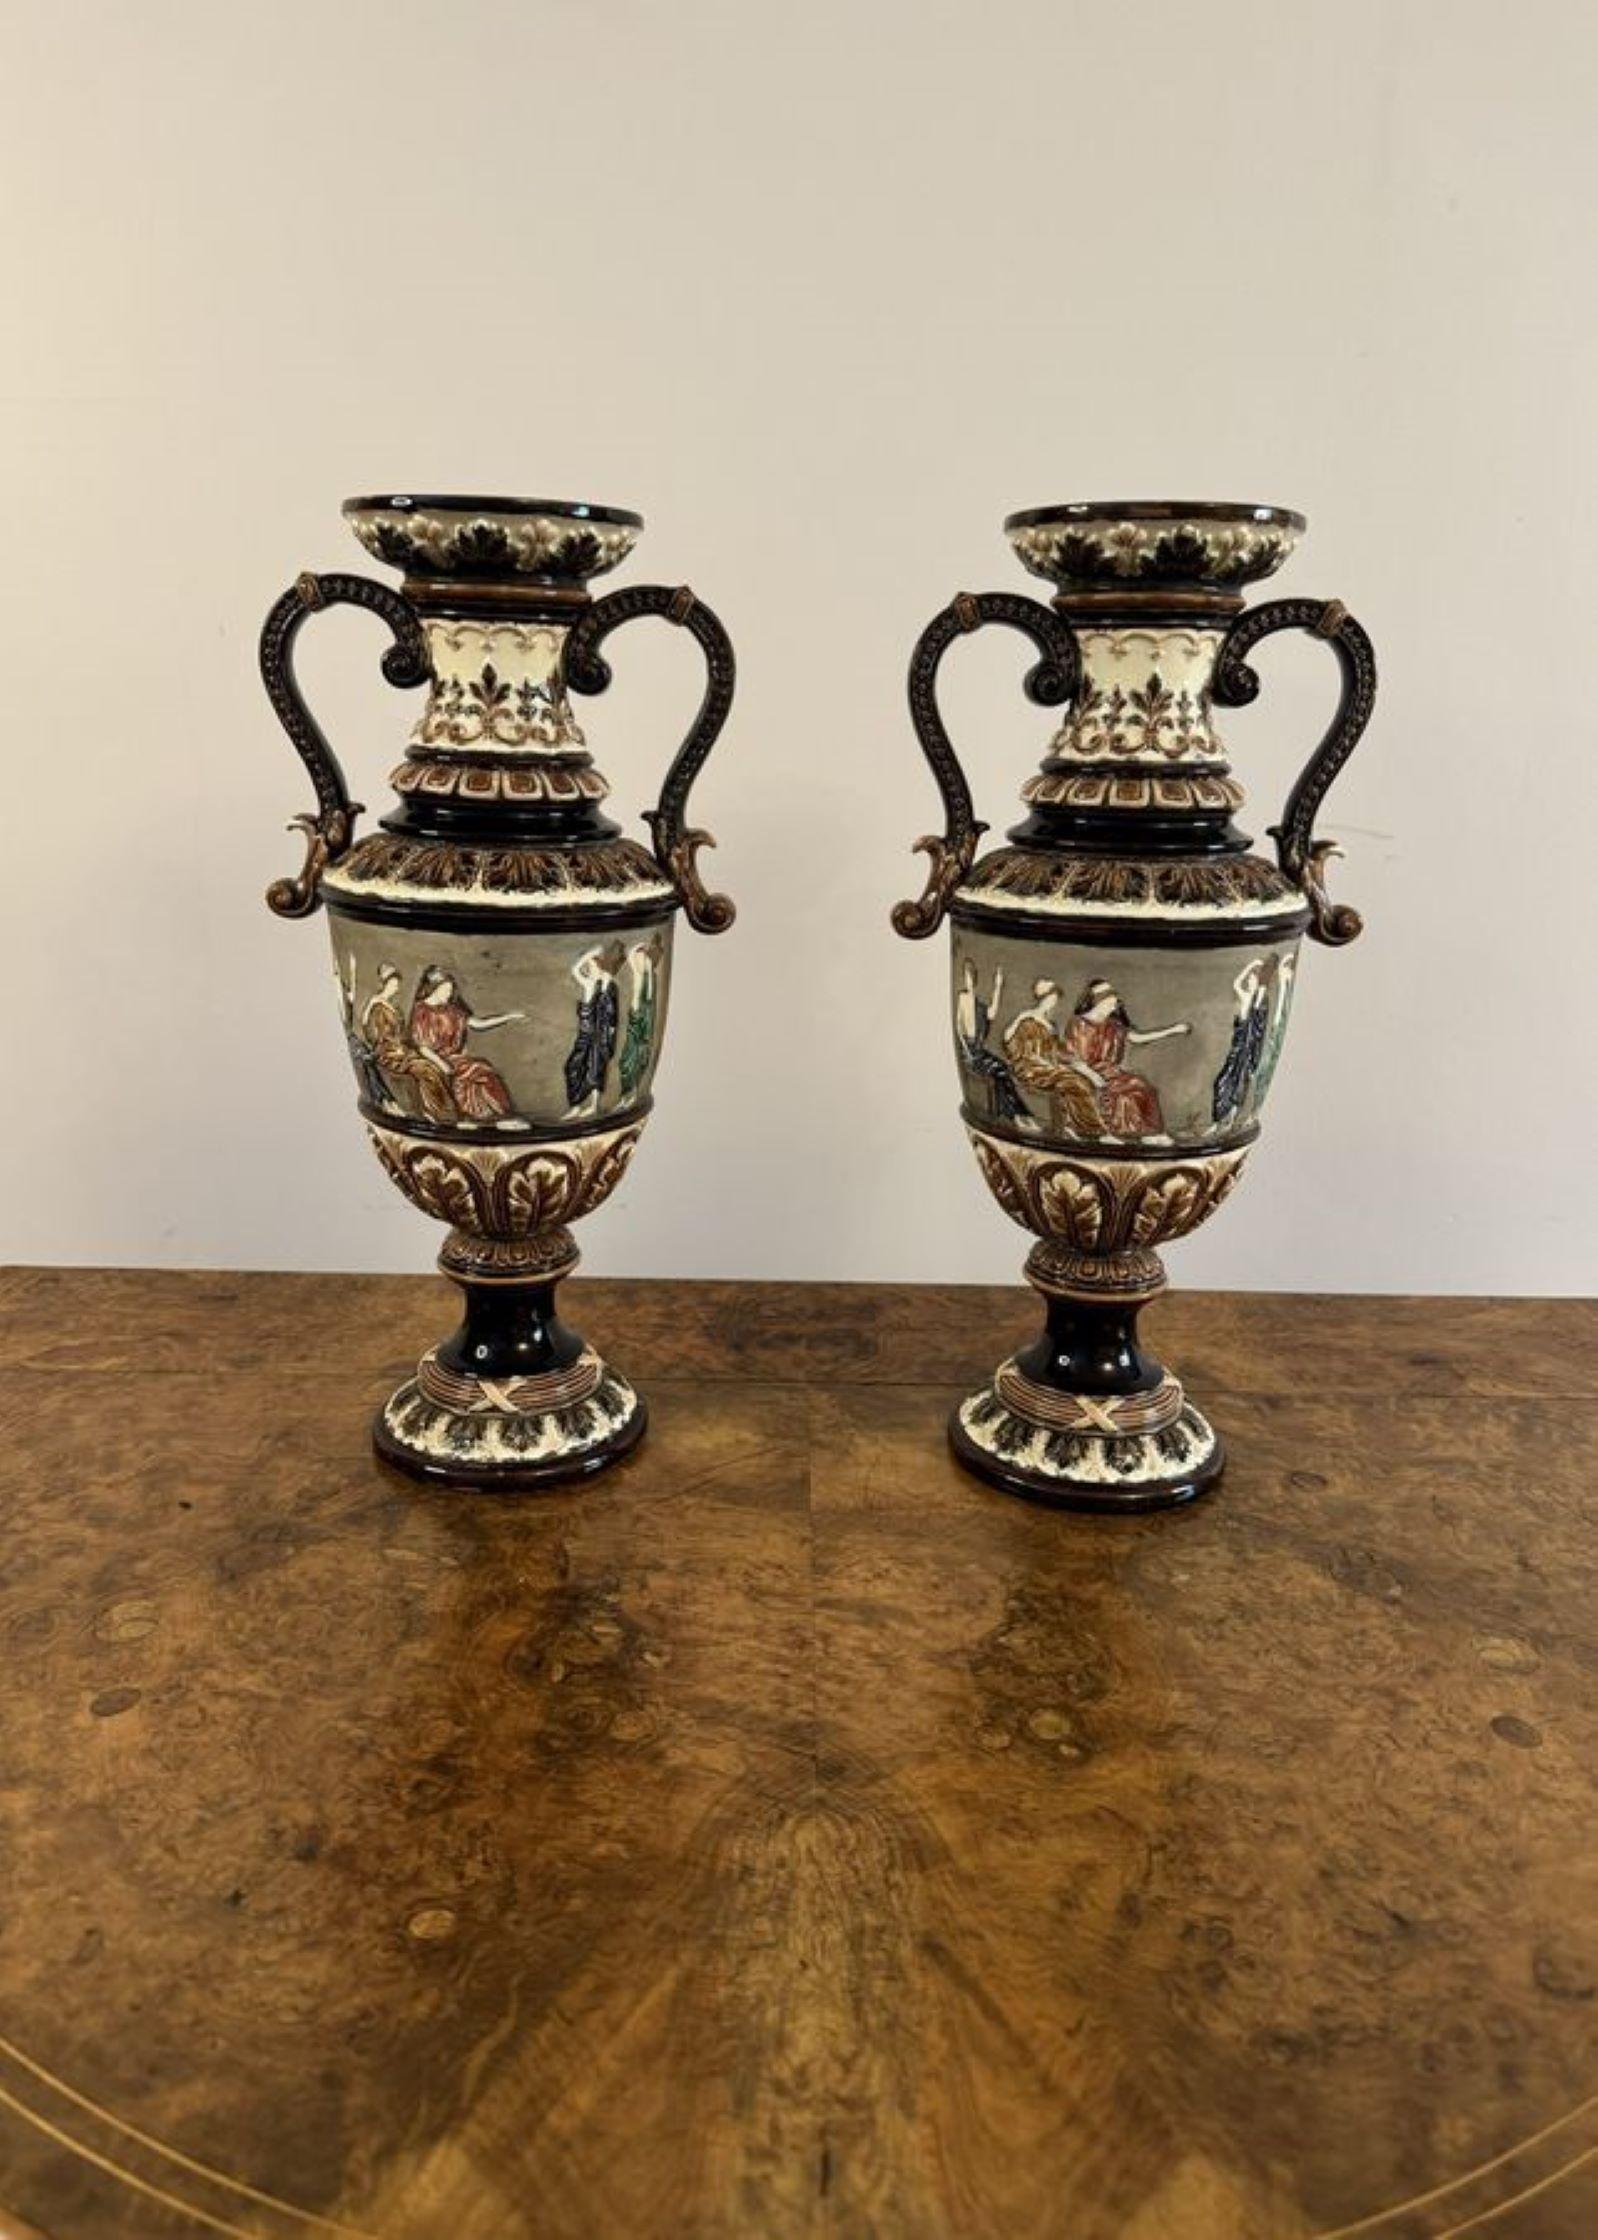 Unusual quality pair of antique Victorian vases having a quality pair of antique Victorian vases, decorated with figures, scrolls, flowers and leaves hand painted in stunning brown, green, blue colours, having a fluted shaped neck, twin shaped